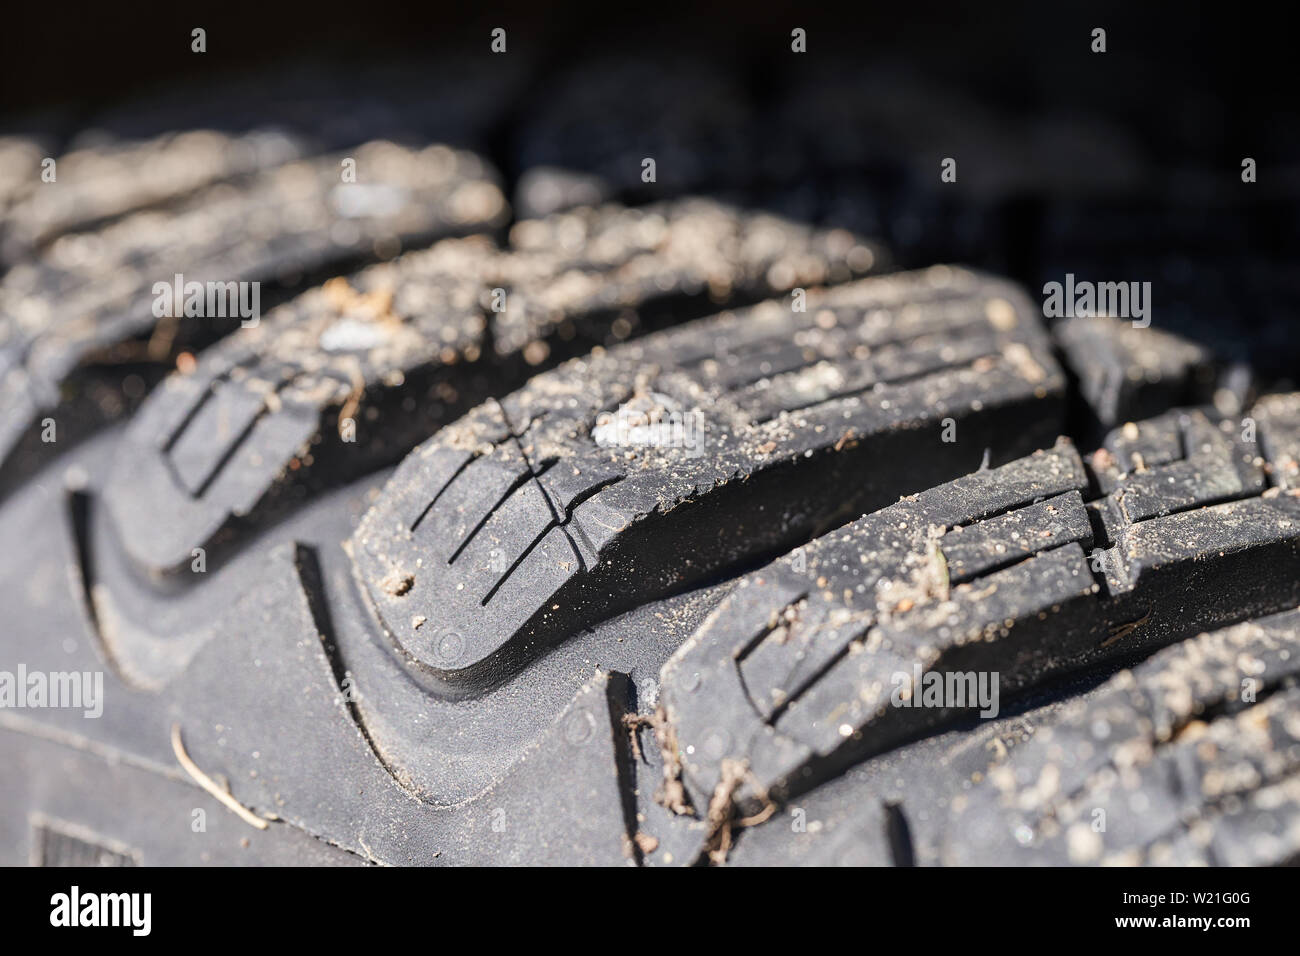 Car tire tread with spikes close up. Stock Photo